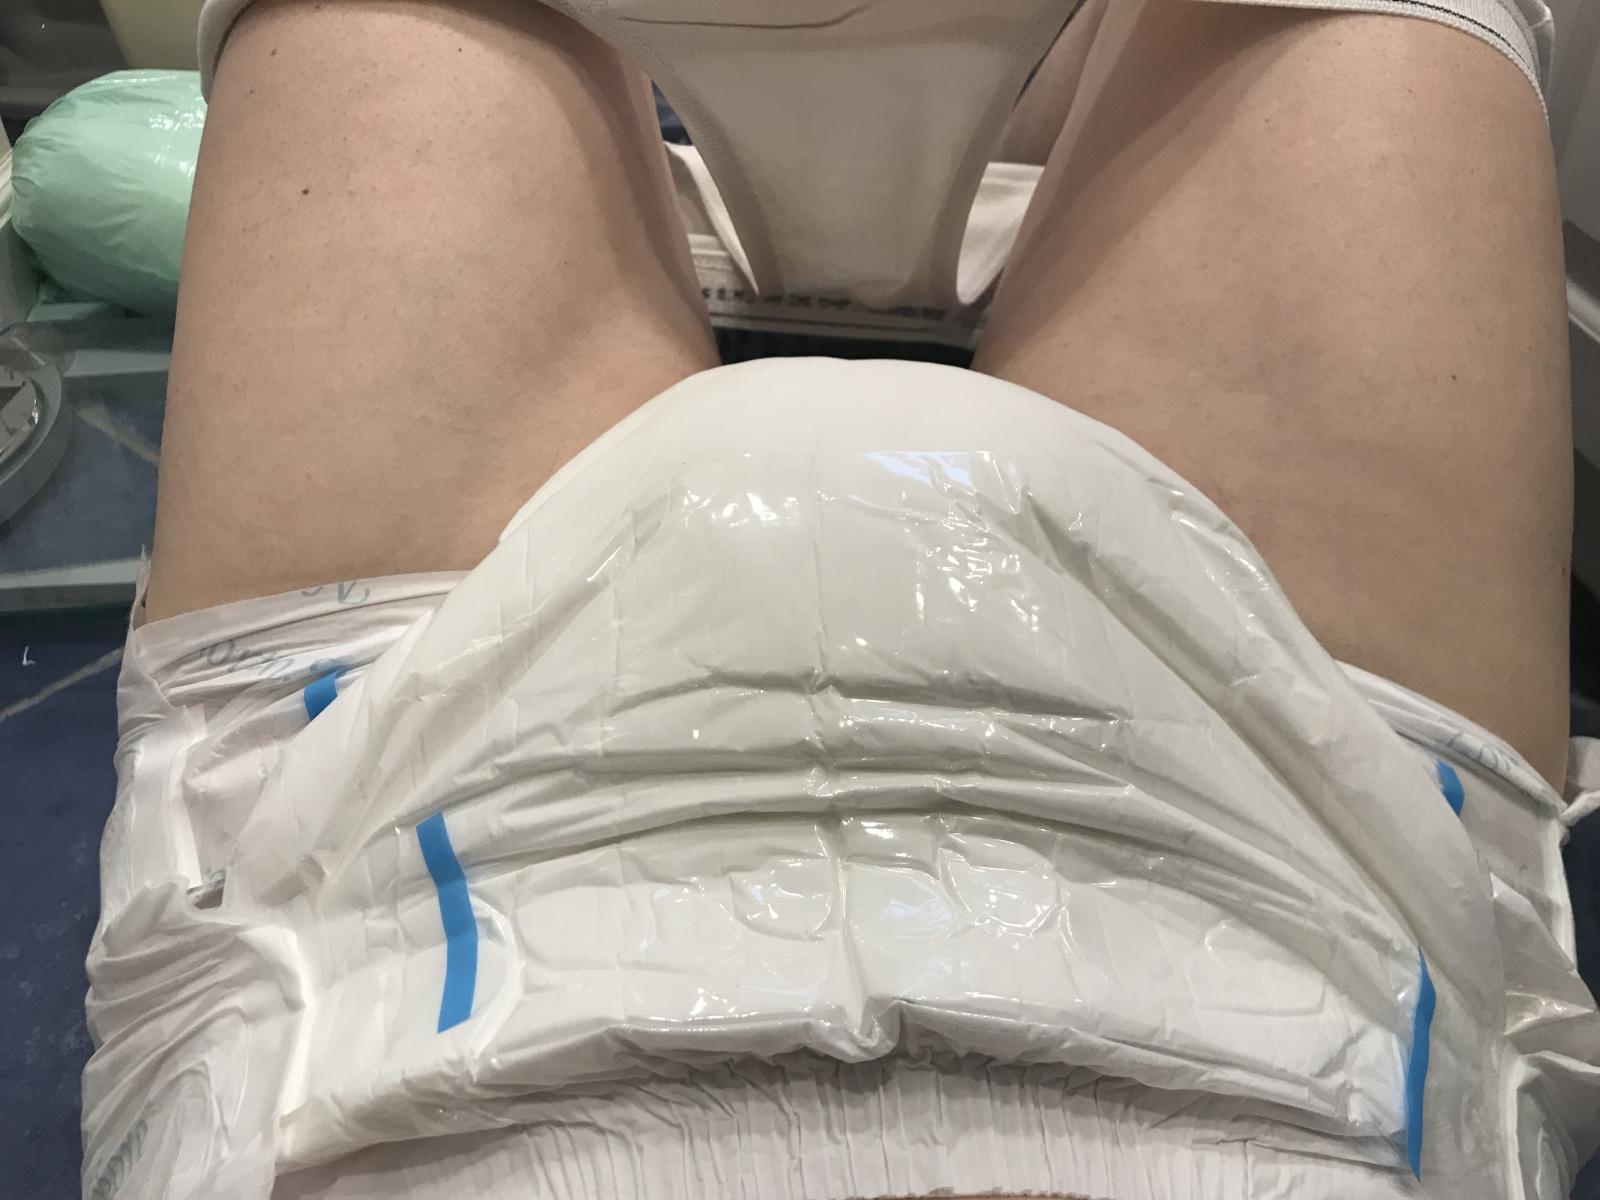 Gobphus in a soaked NorthShore MegaMax diaper and large booster pad.